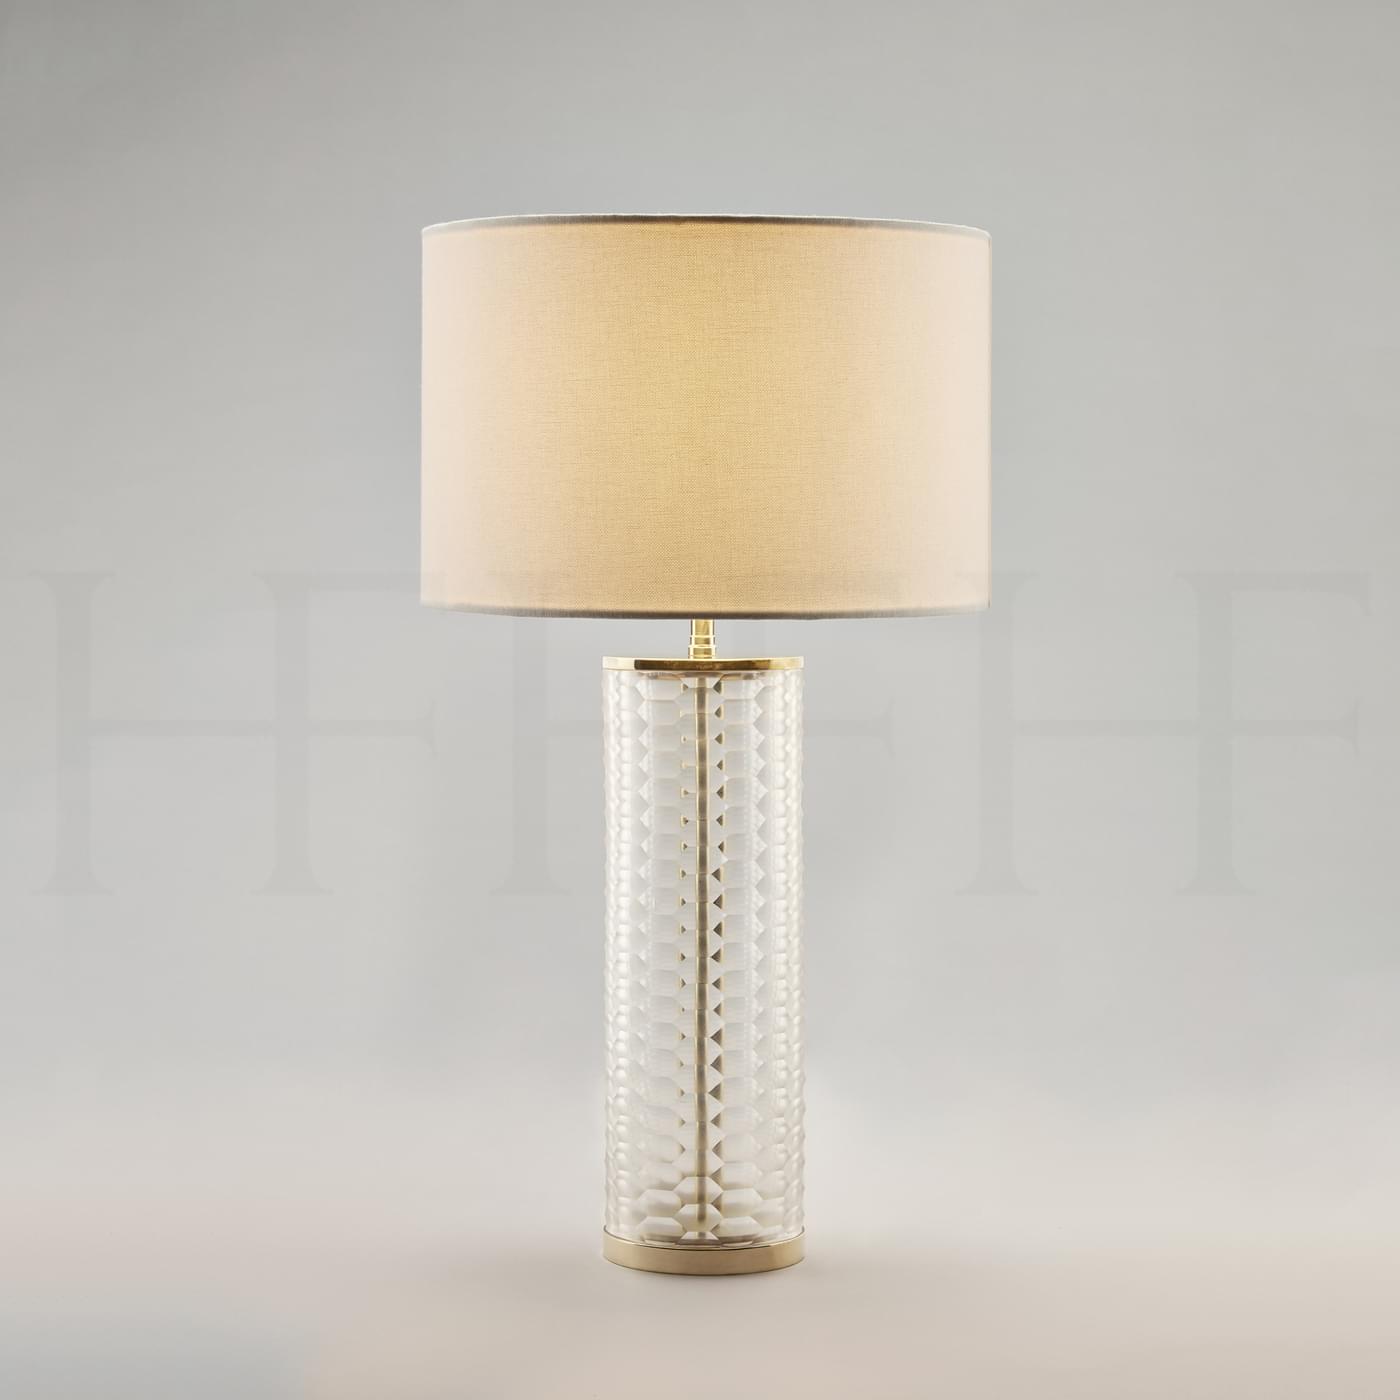 Tl60 Clear Honeycomb Glass Table Lamp L